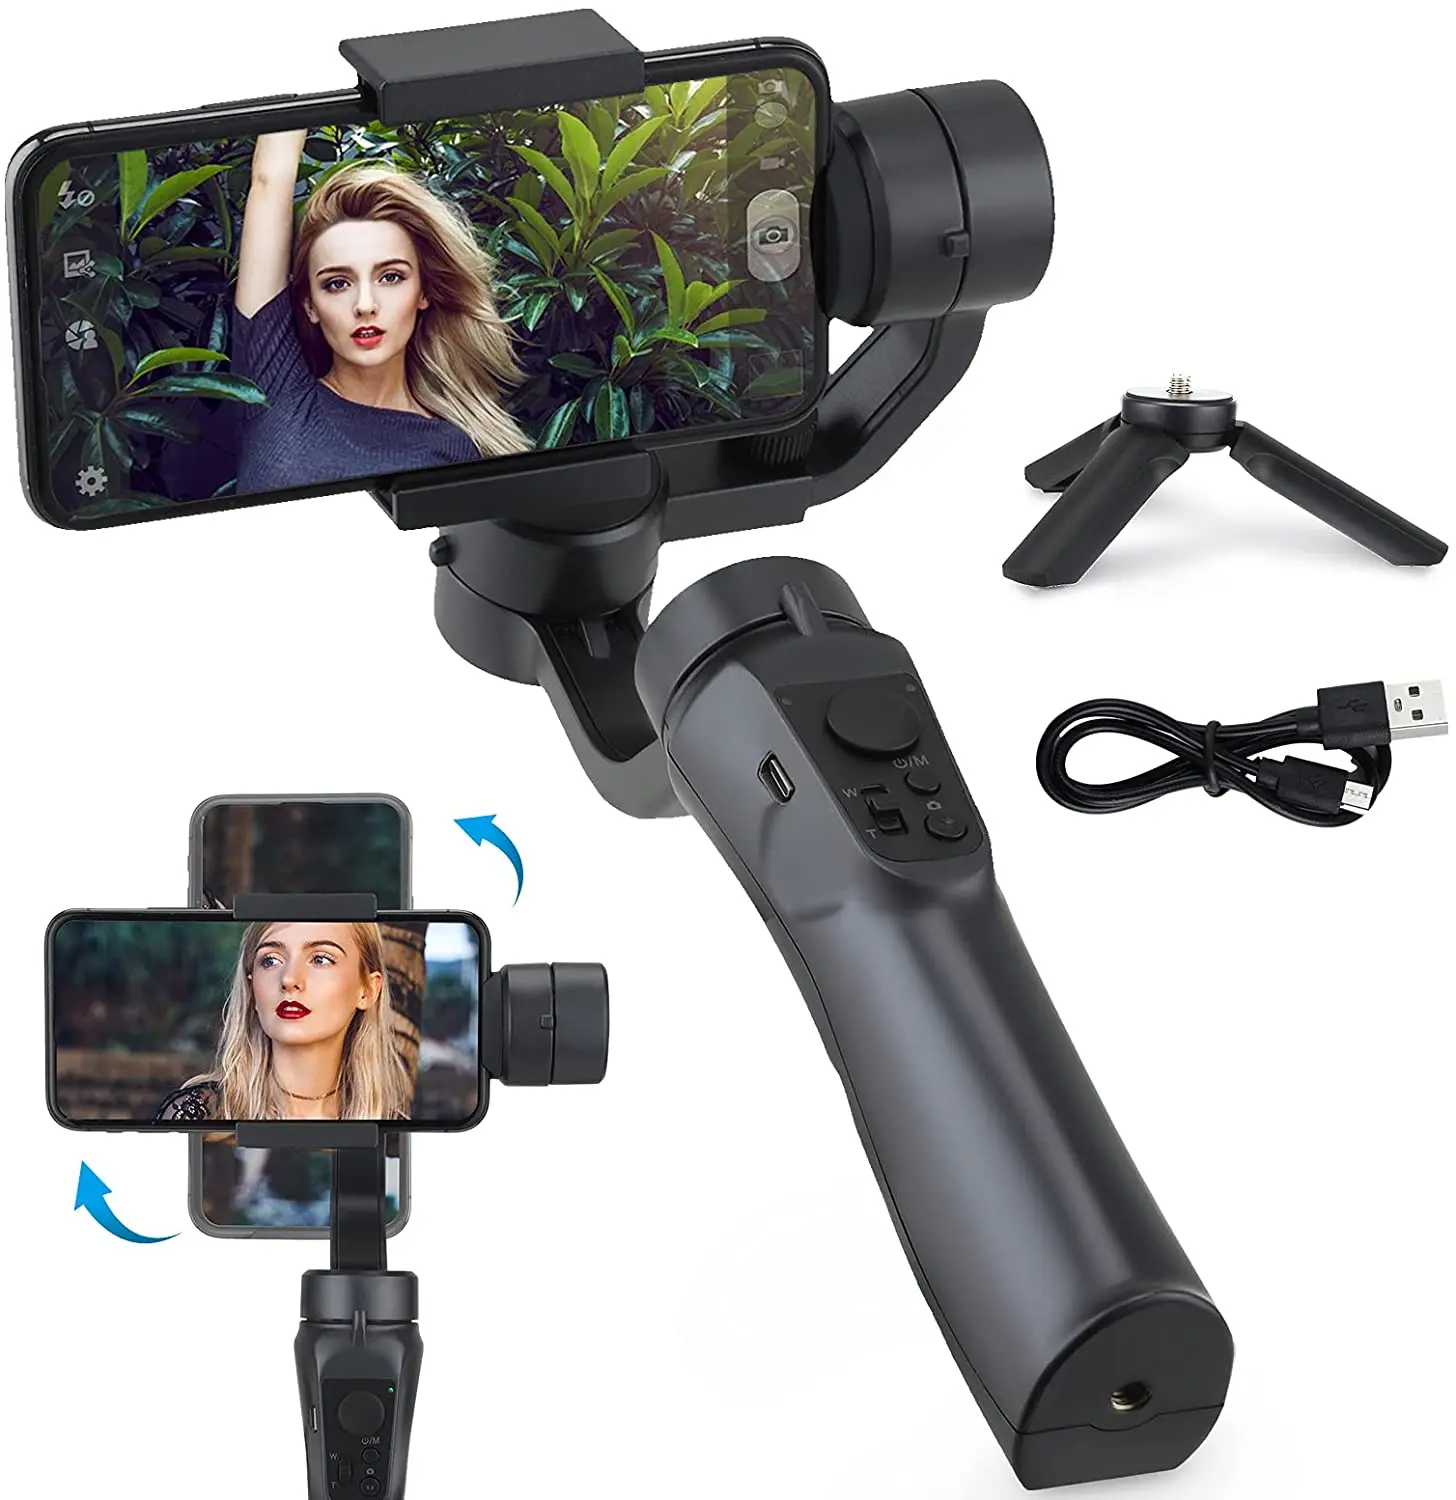 

F6 3 Axis Gimbal Handheld Stabilizer Cellphone Action Camera Holder Anti Shake Video Record Smartphone For Xiaomi iPhone Samsung